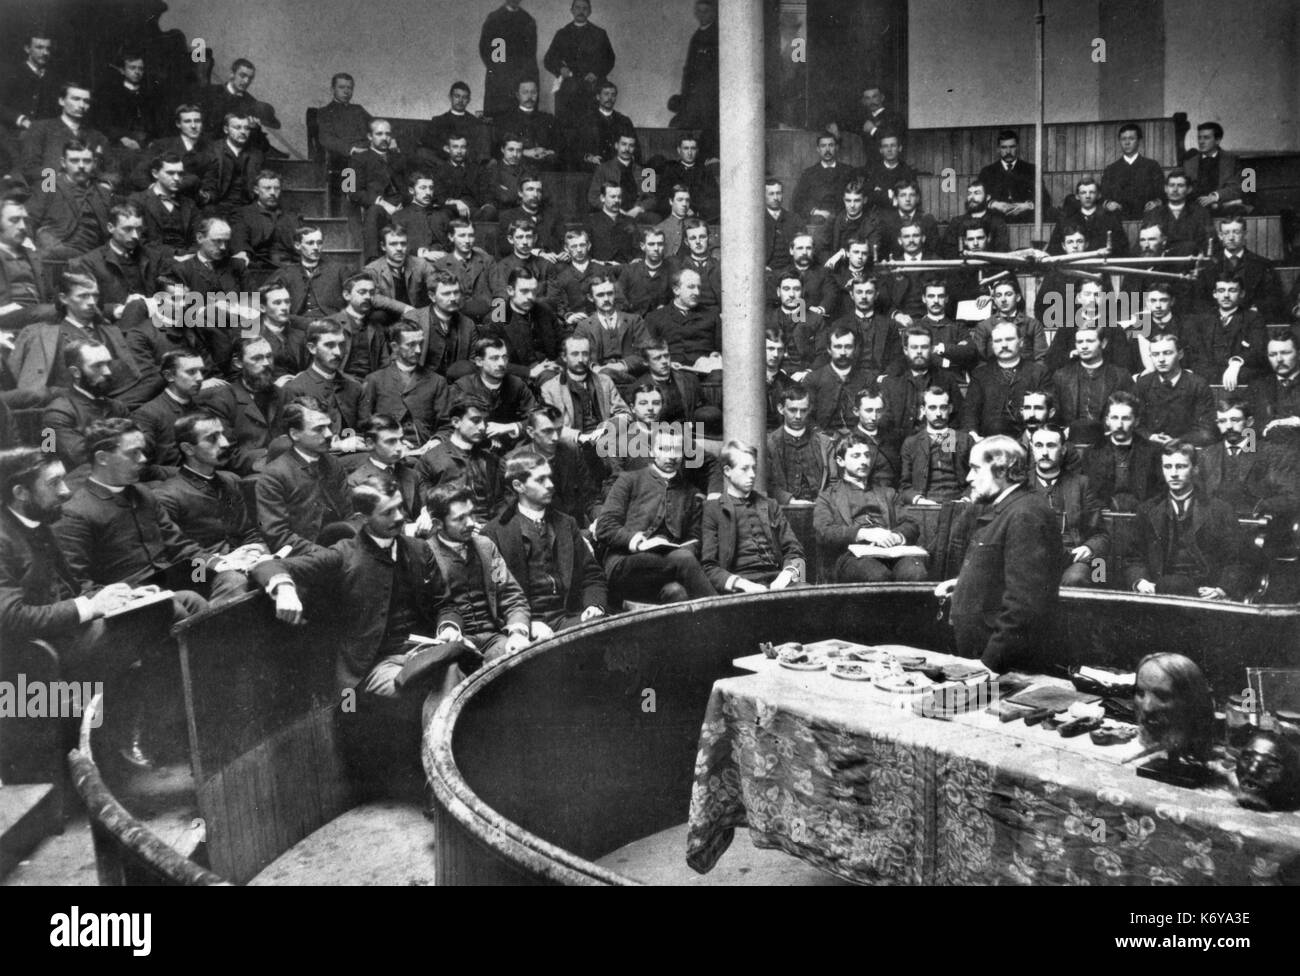 Lecture at the University of Pennsylvania School of Medicine in 1888, when the school was already 123 years old. Philadelphia, Pennsylvania, 1888. Stock Photo